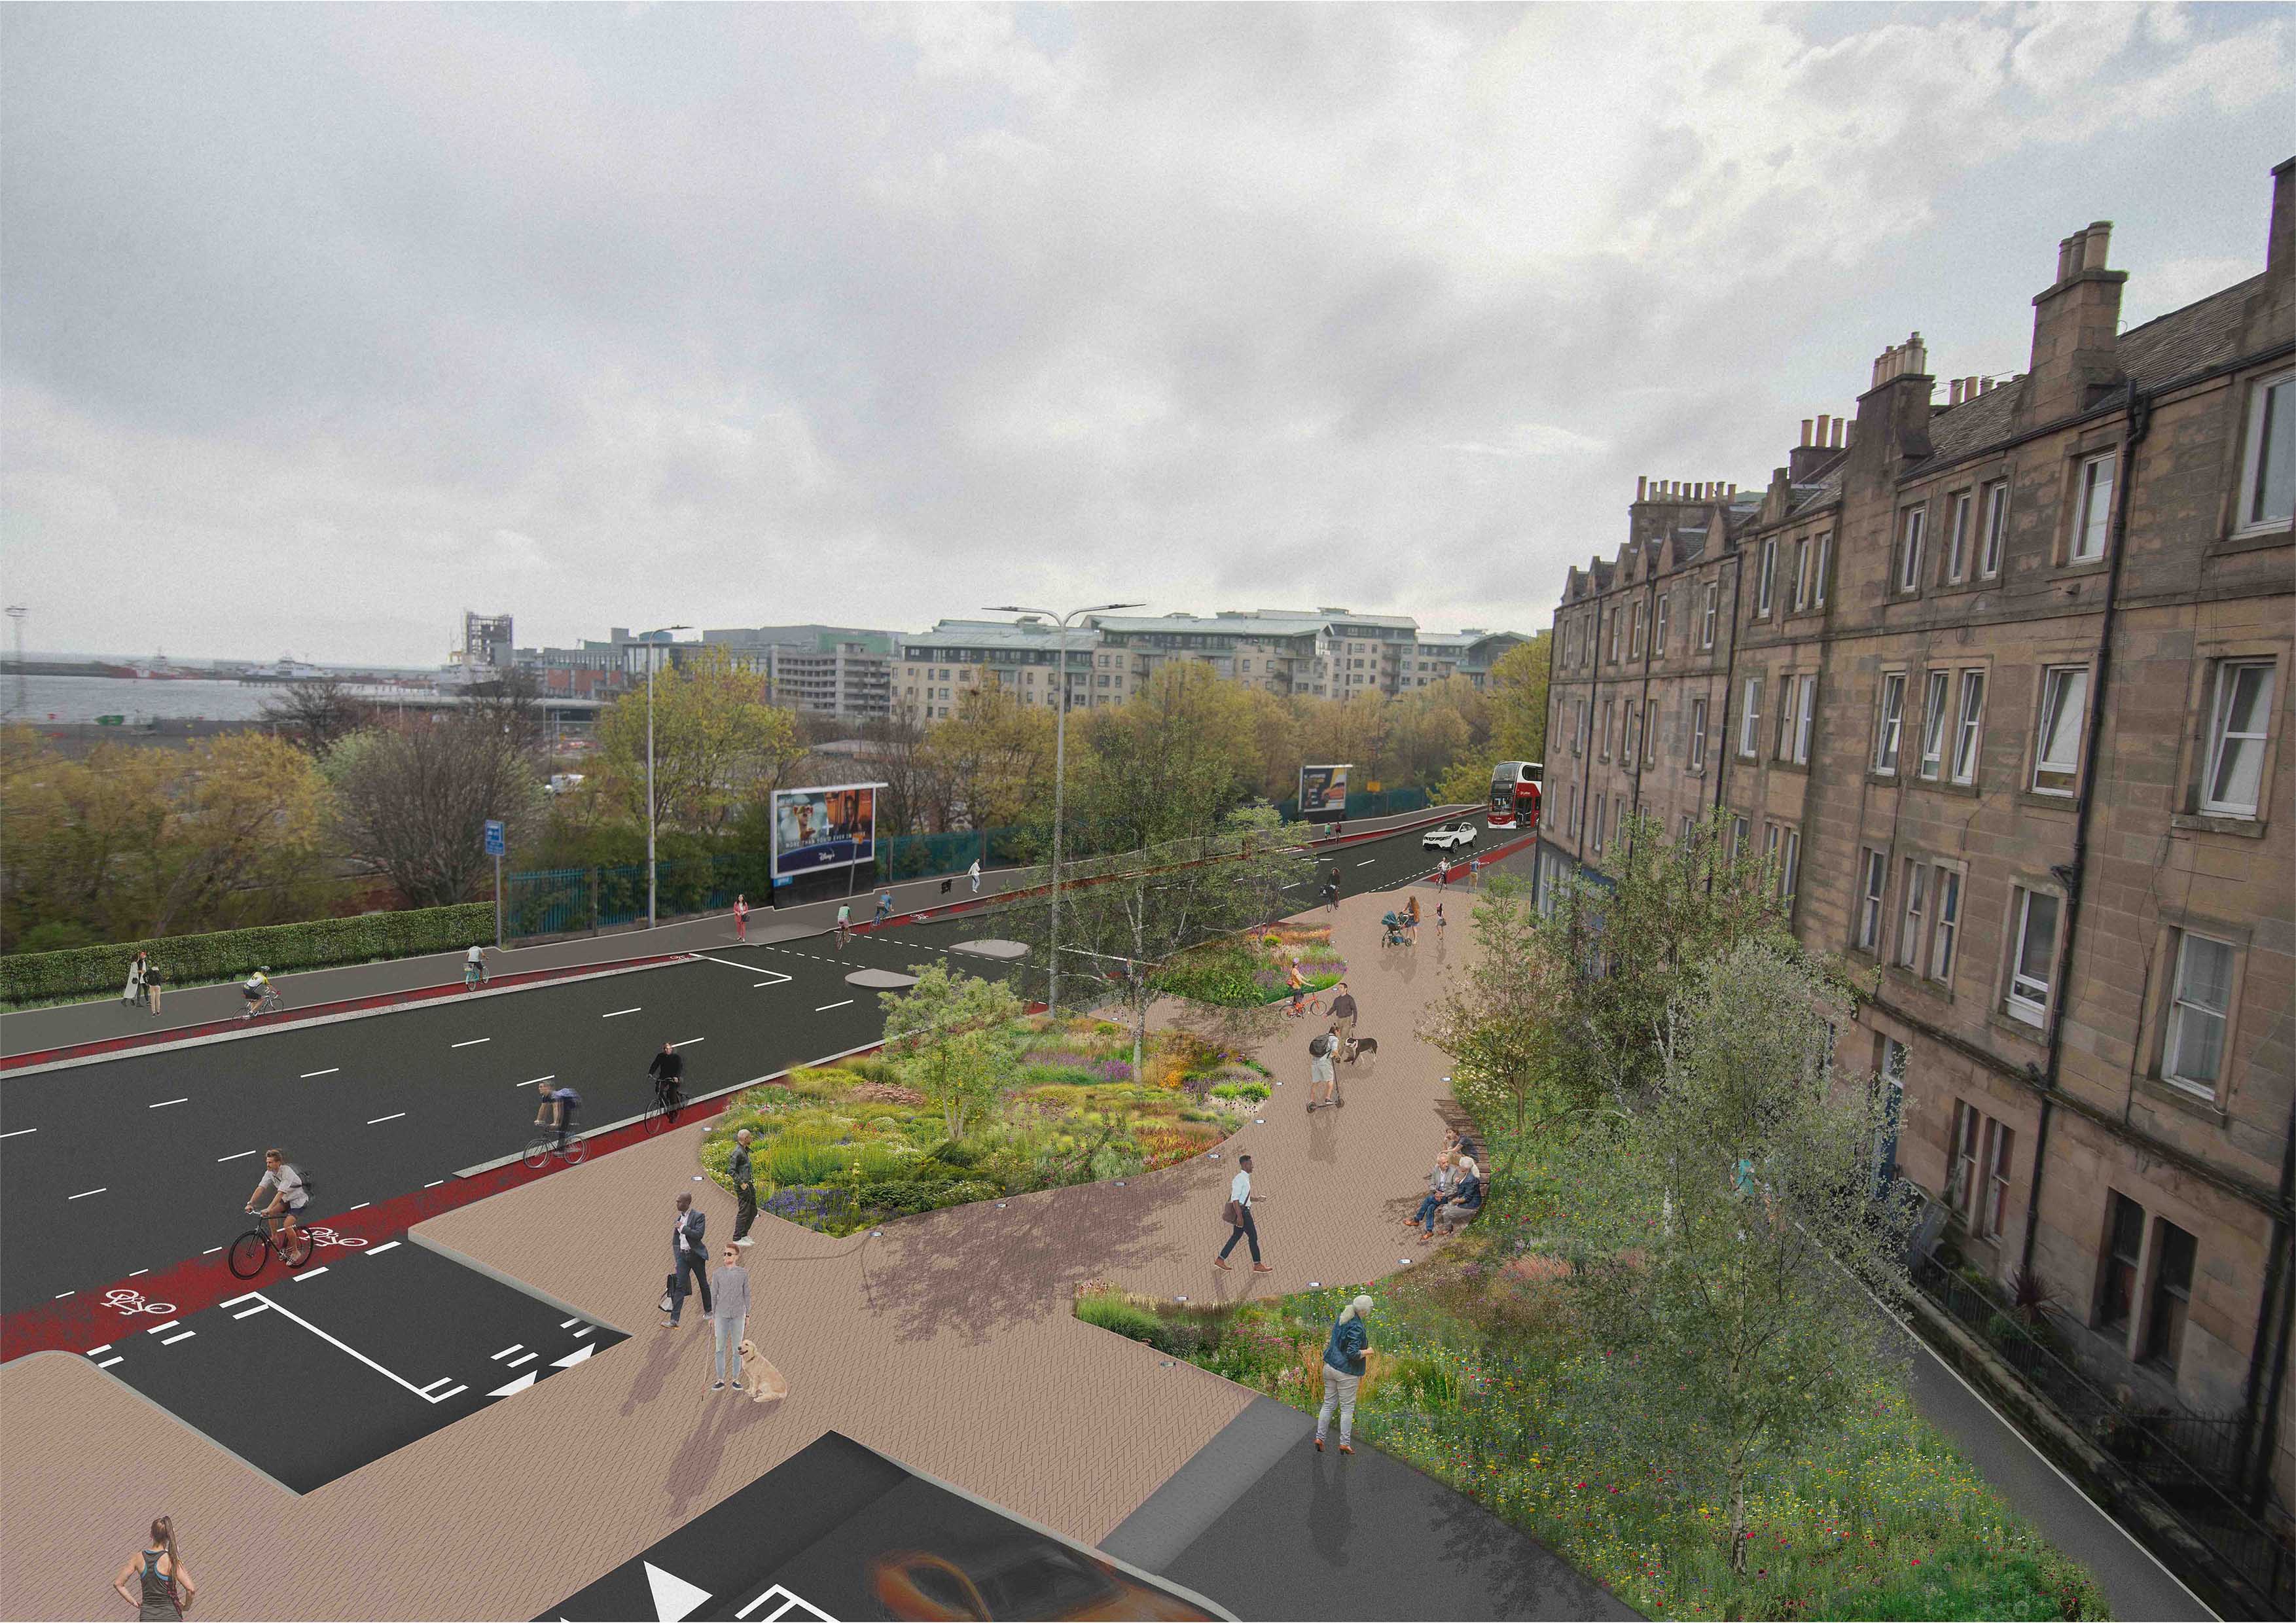 Consultations on better sustainable transport connections to support Edinburgh’s new housing developments